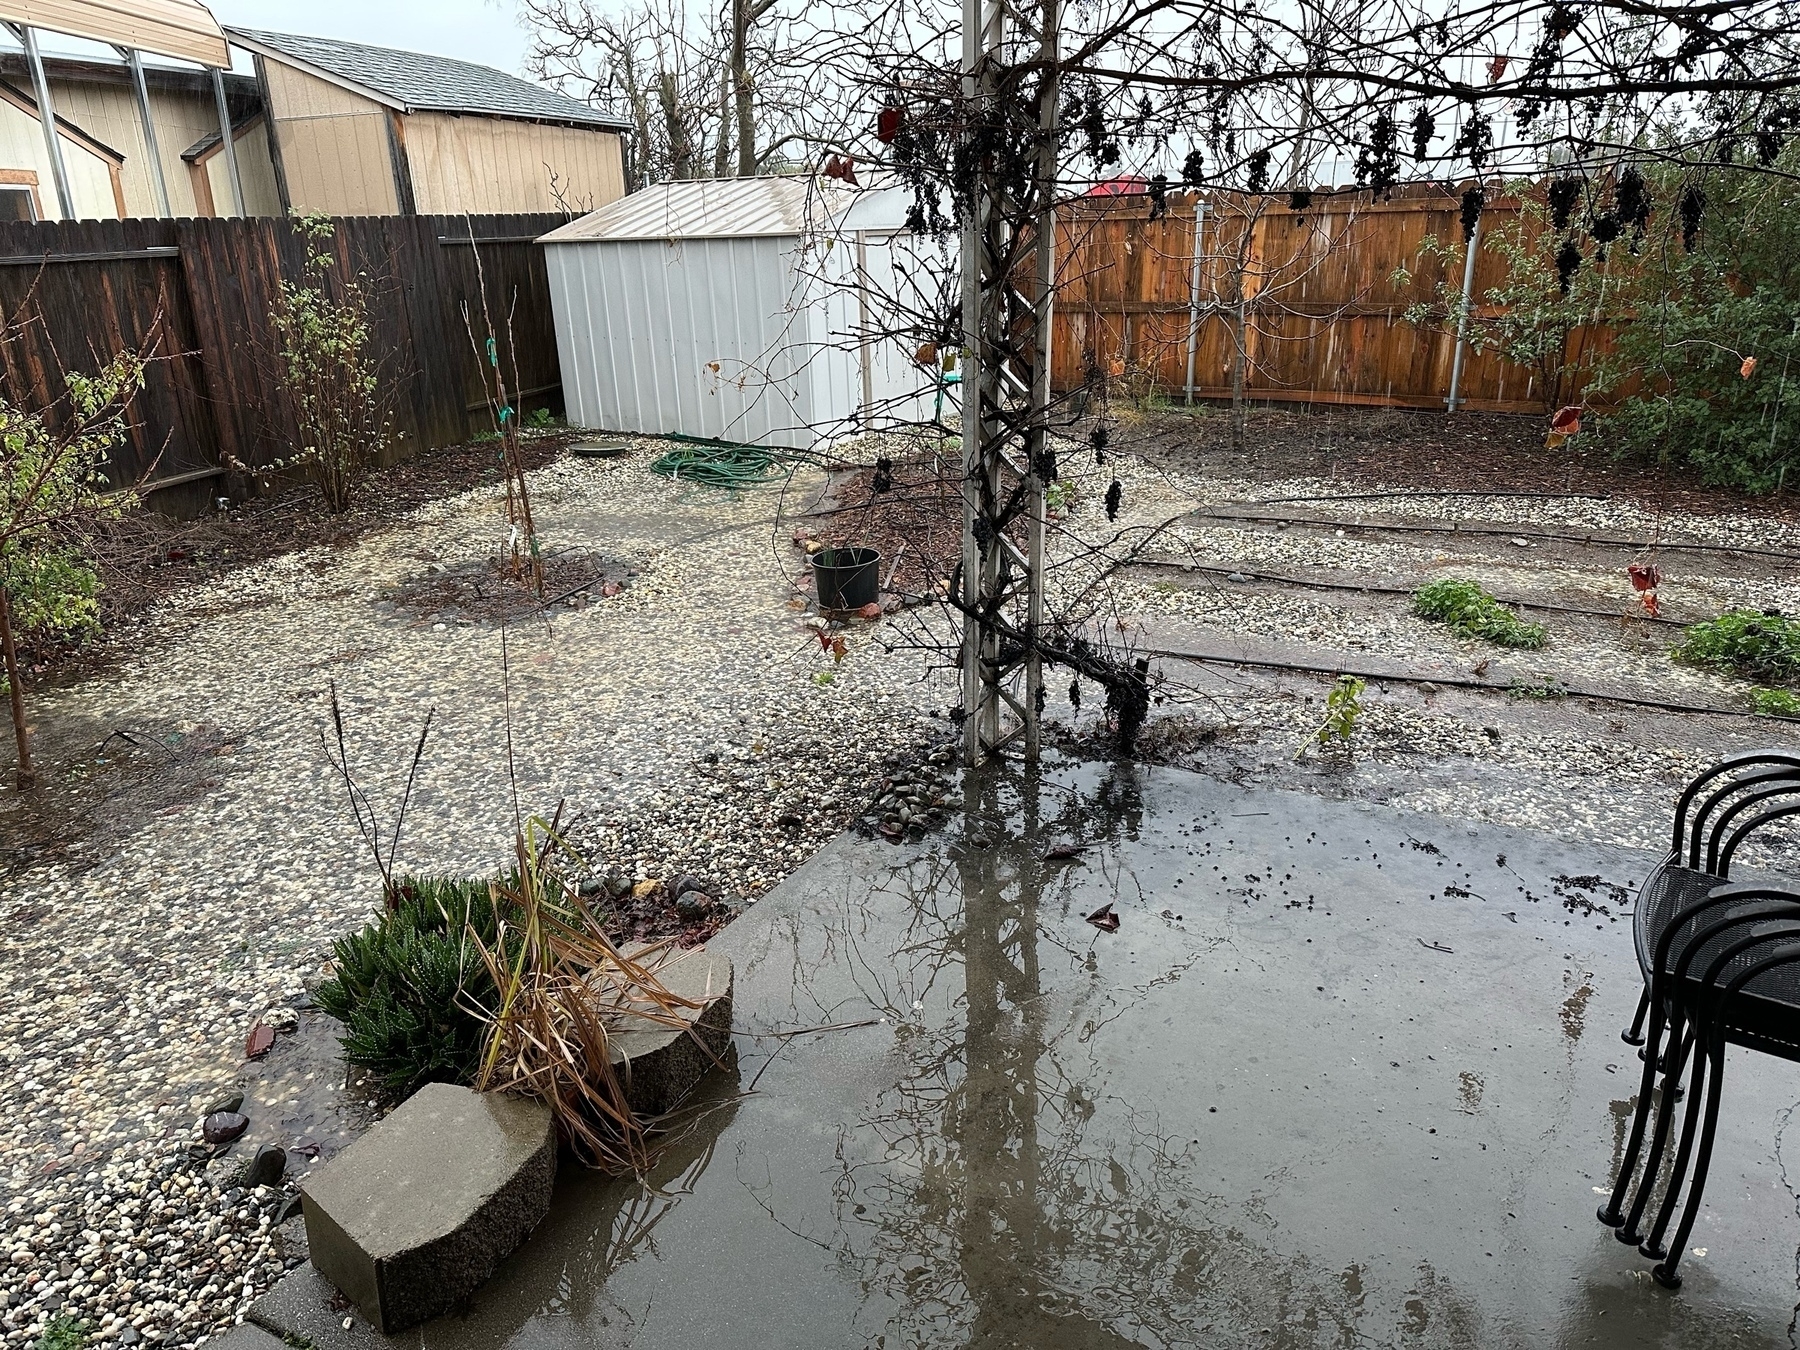 Ponding in a backyard with crop rows and various stone fruit trees with no leaves. It is not yet flooded Annie the patio cement.